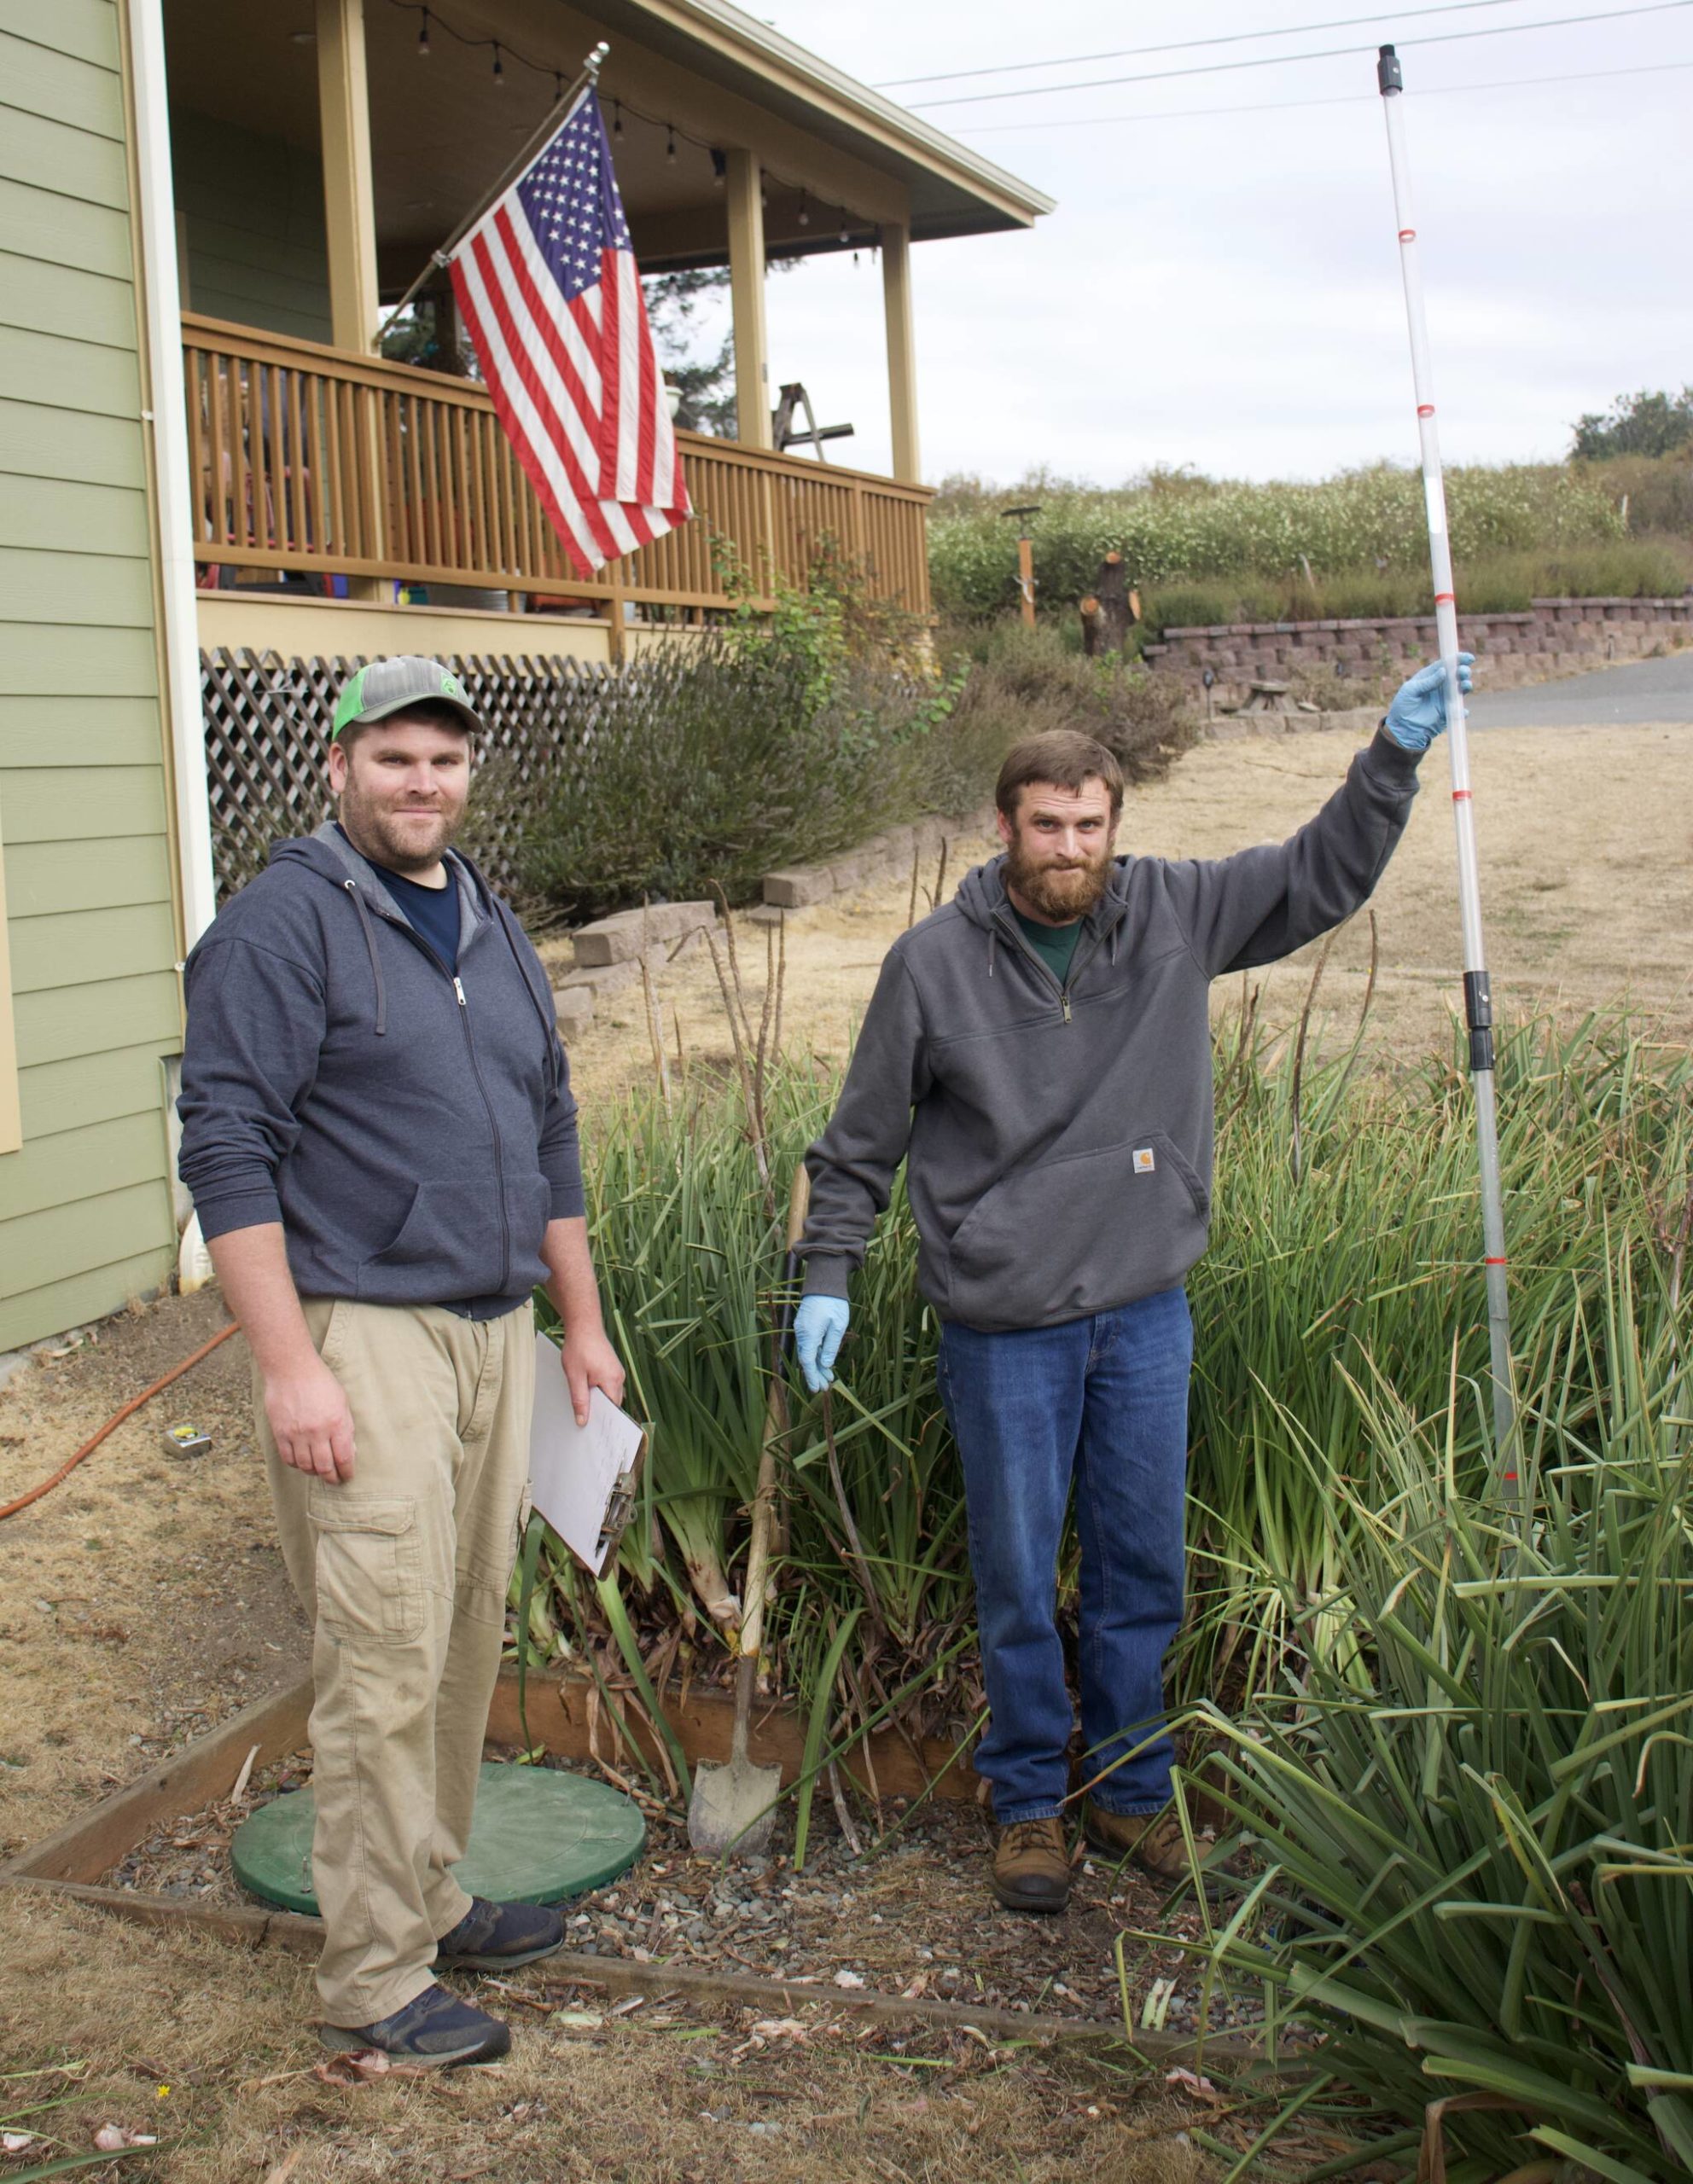 Photo by Rachel Rosen/Whidbey News-Times
Ben Miller (left) and his brother Seth (right) own Whidbey Septic. Their business involves inspecting and maintaining septic systems. Seth holds a core sampler that is used to see the contents of a septic tank.